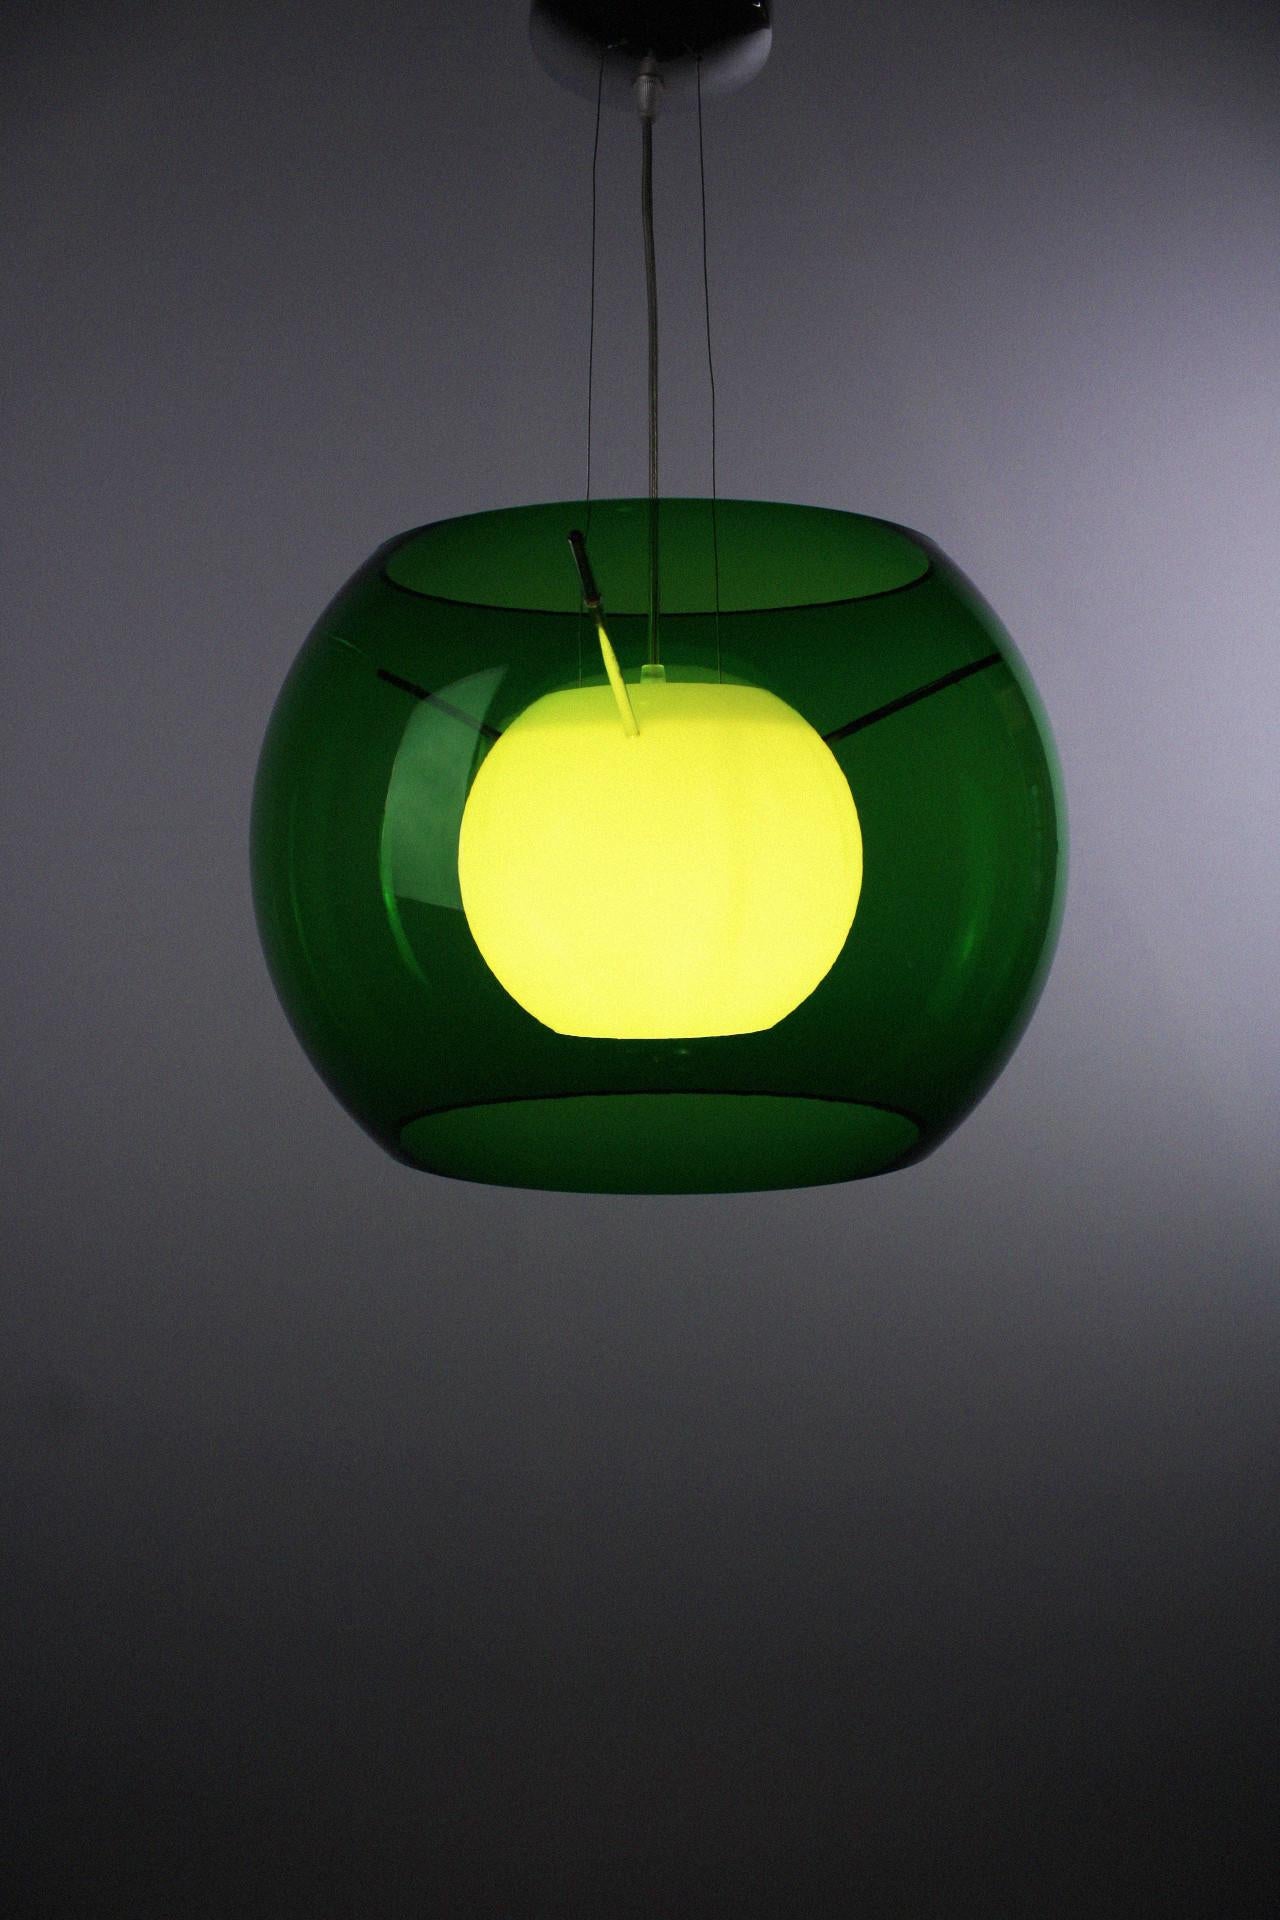 This beautiful pendant lamp was designed by Maurizio Ferrari, an Italian designer who has been active since the 1970s. This unique design comes under the name 